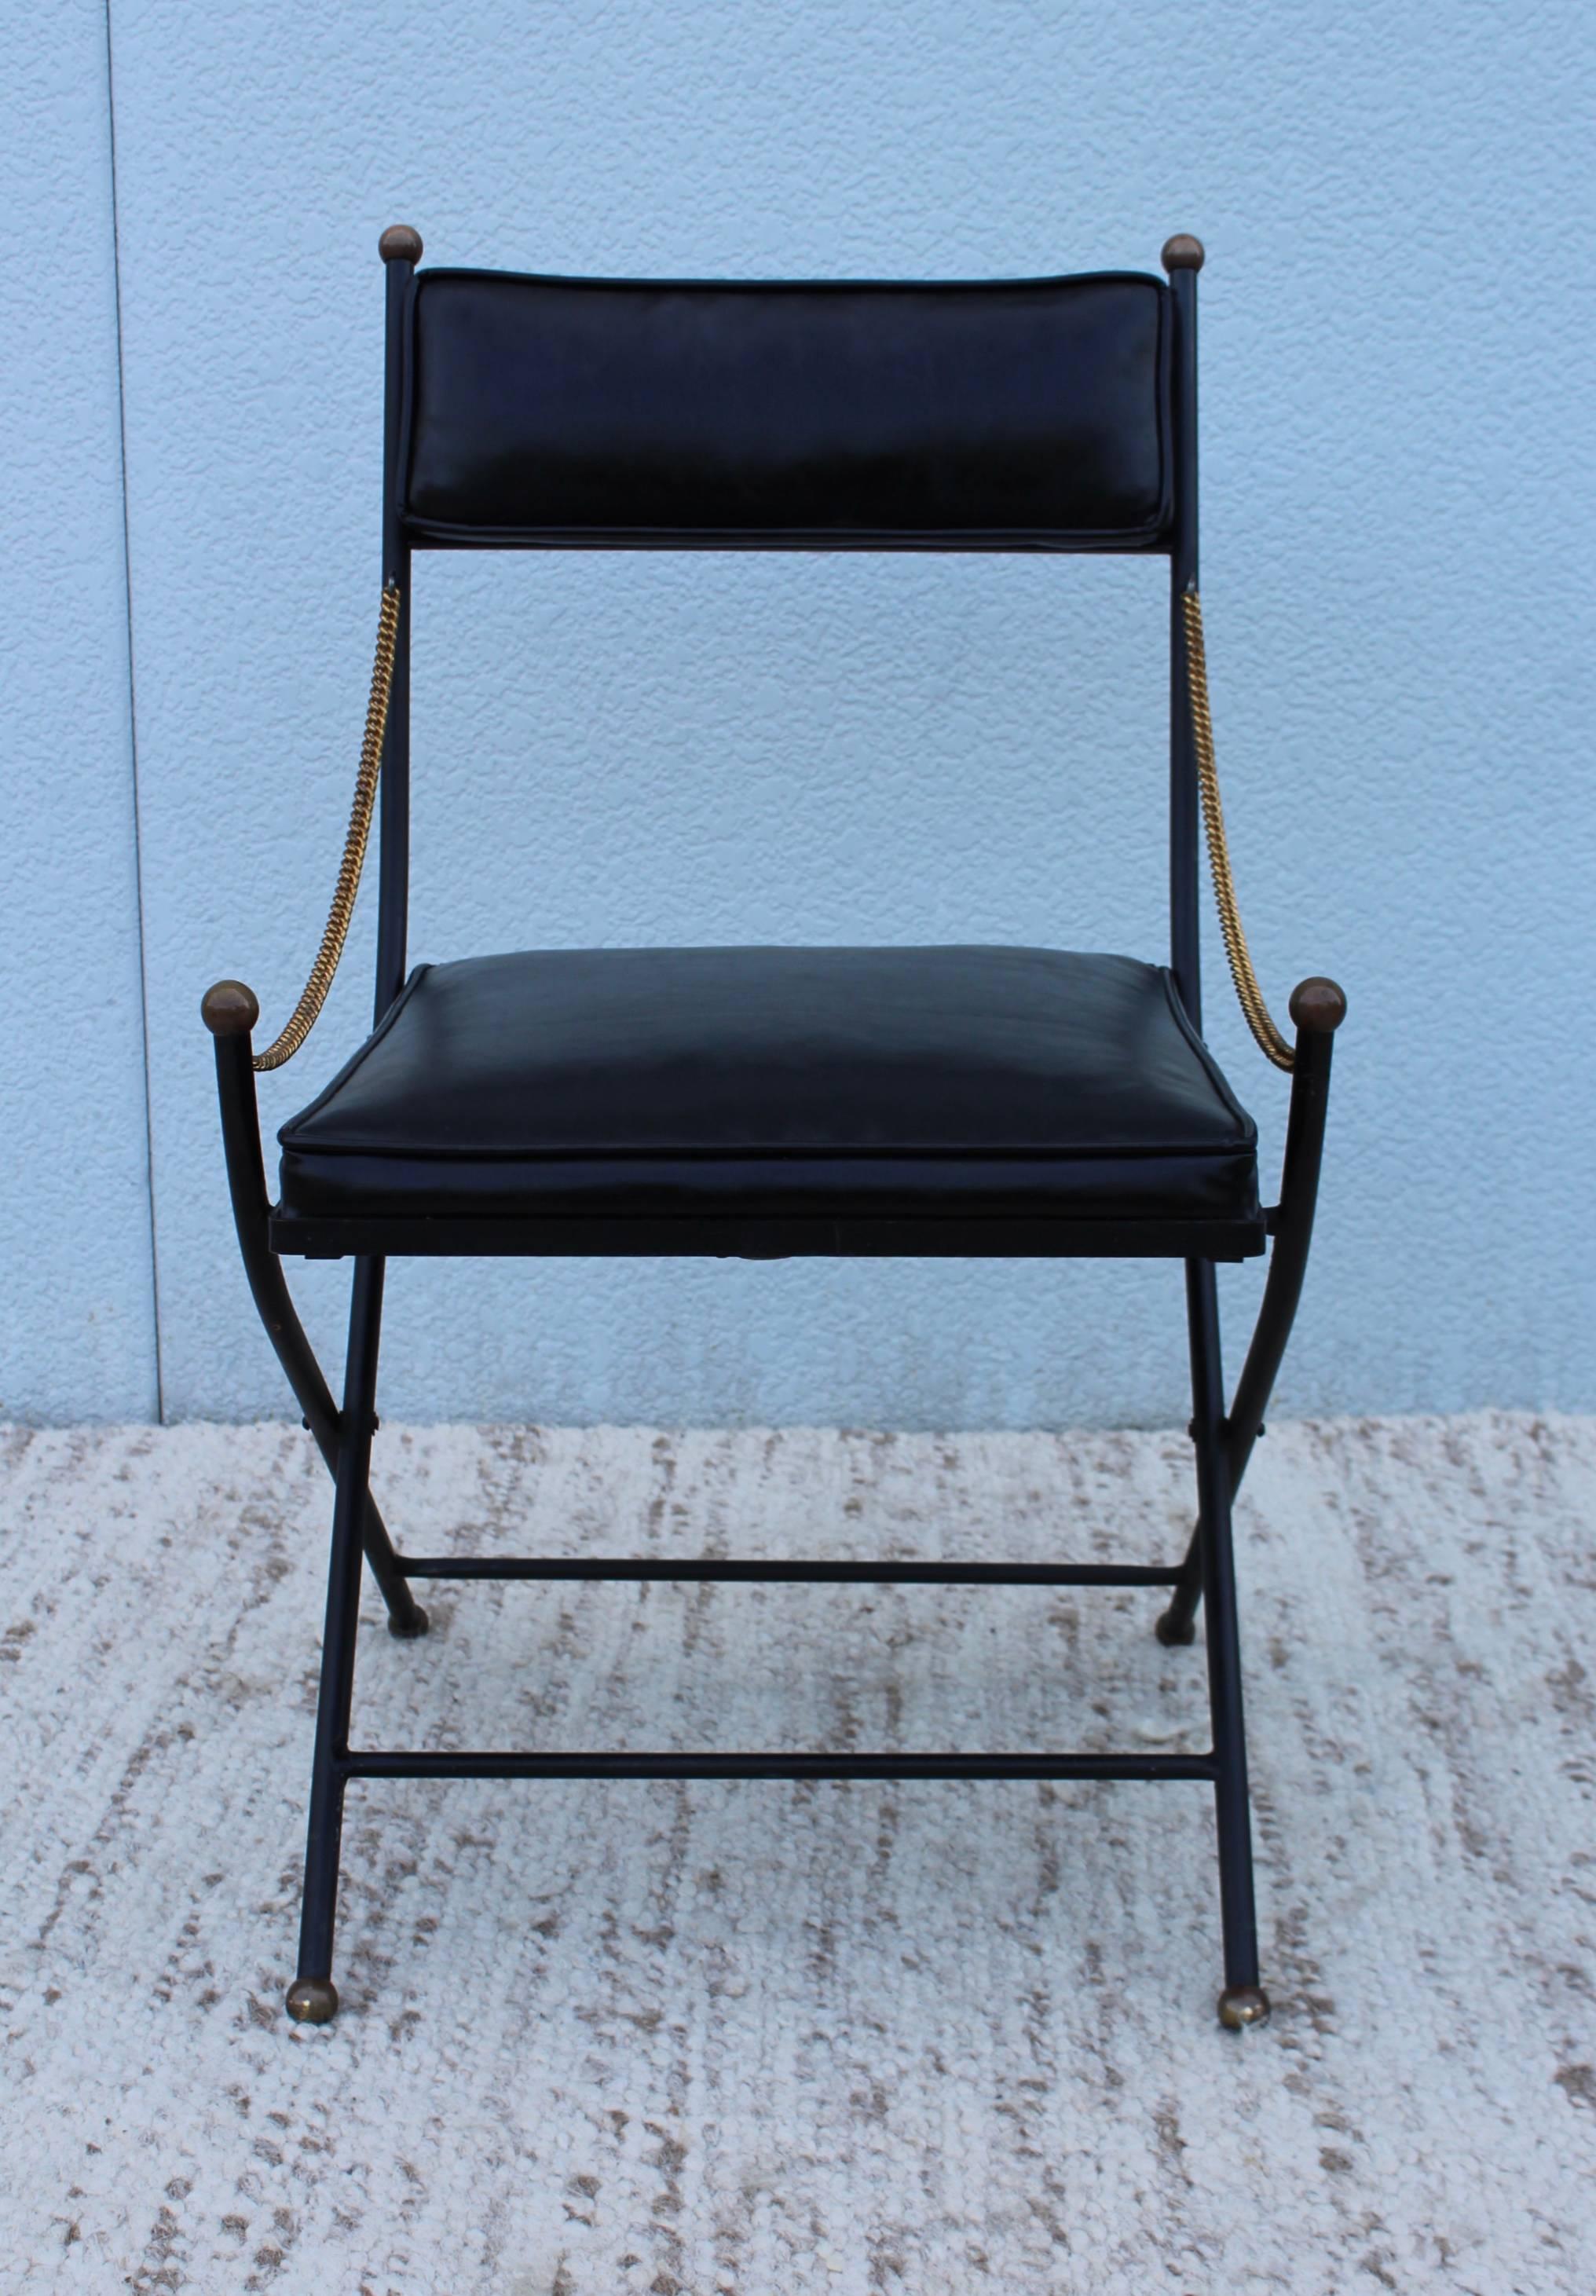 Brass 1950s French Iron Folding Chairs